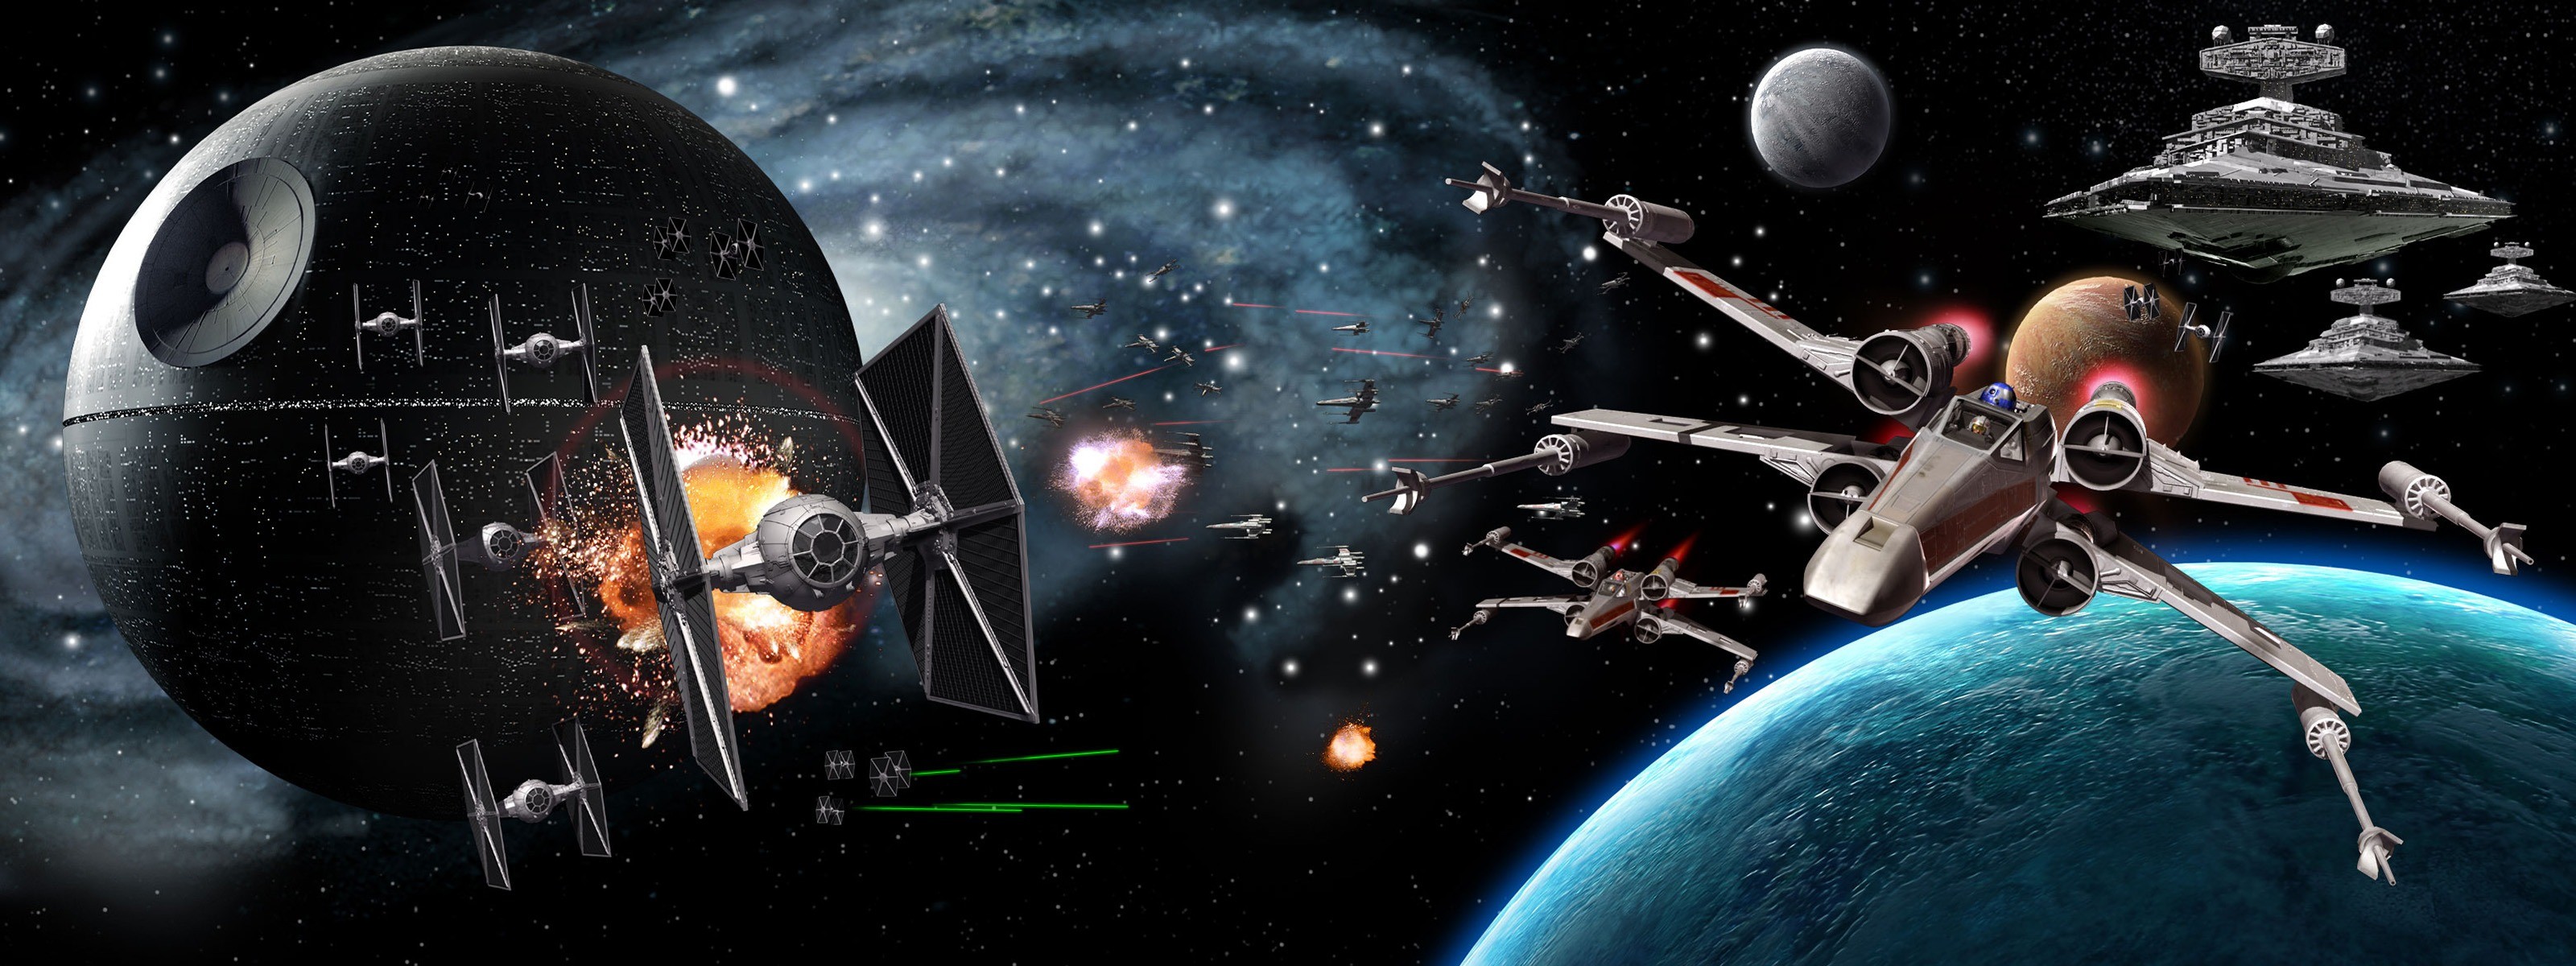 3200x1200 How the Rebel Alliance Defeats the Galactic Empire from Star Wars